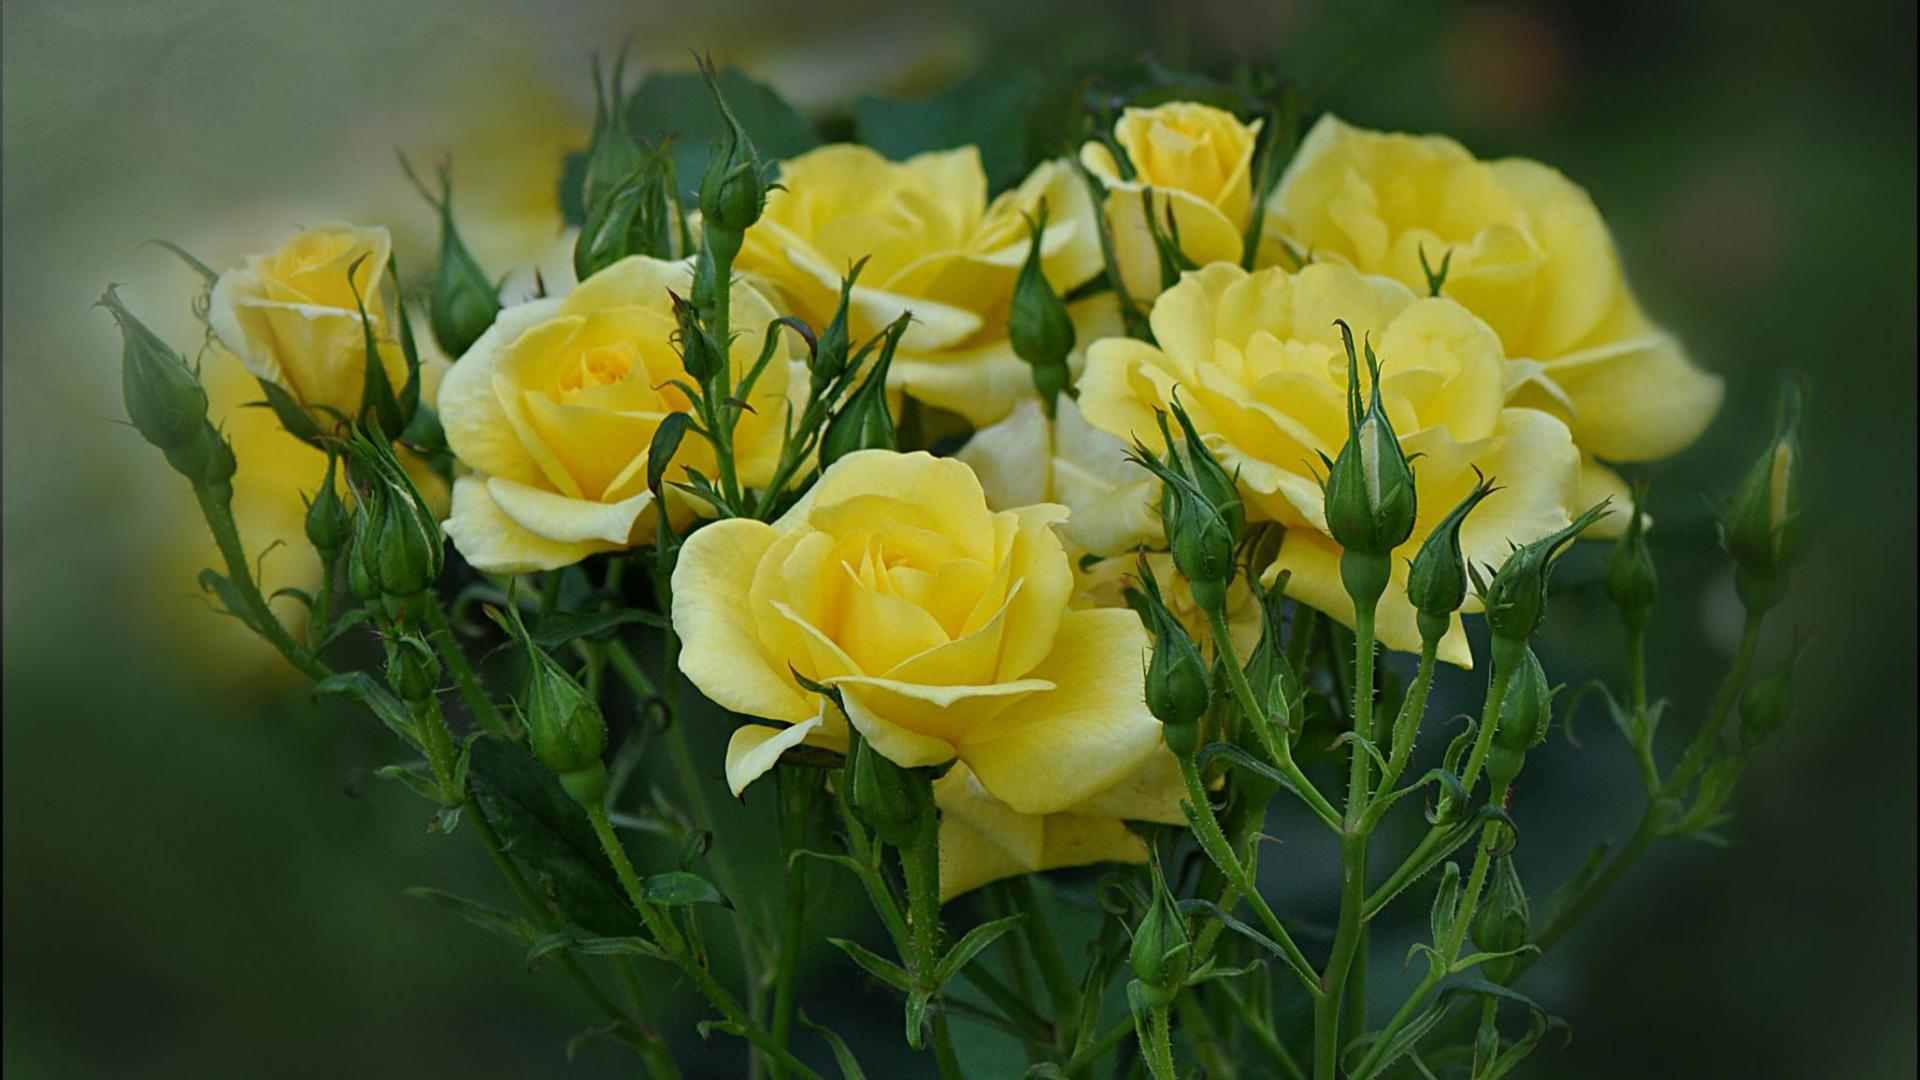 Yellow roses are blooming in the garden wallpaper and image